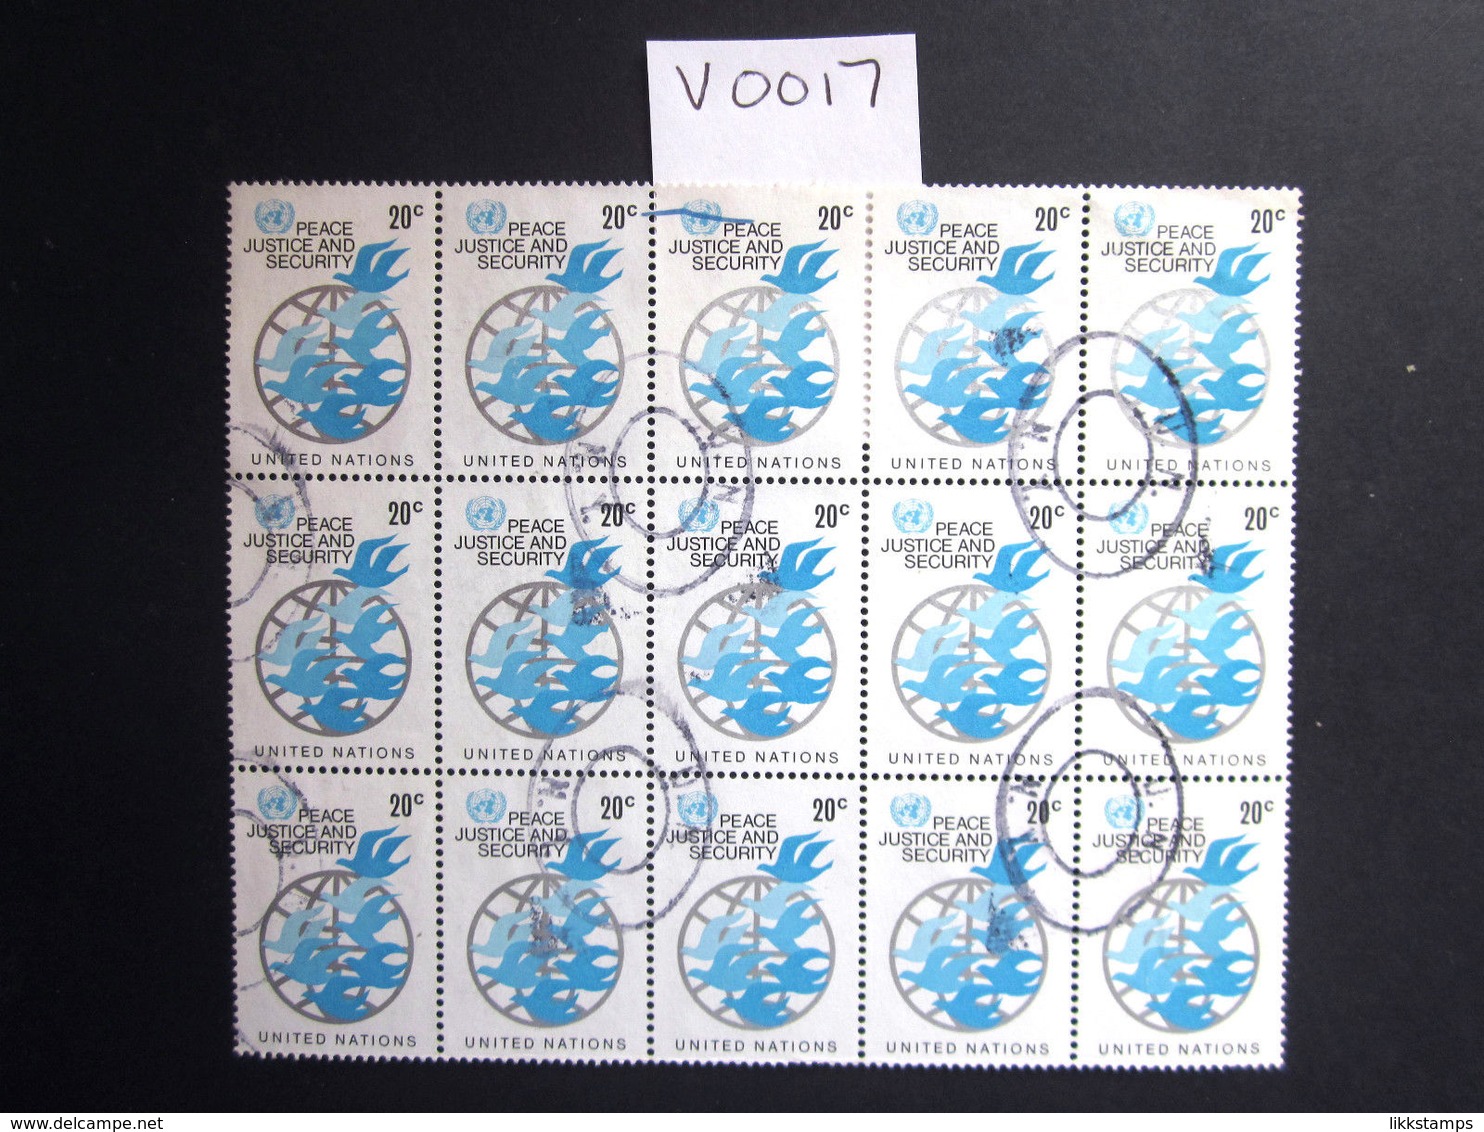 1979 FINE USED BLOCK OF 15 "SG 316" PICTORIAL UNITED NATIONS USED STAMPS. ( V0017 ) #00345 - Colecciones & Series